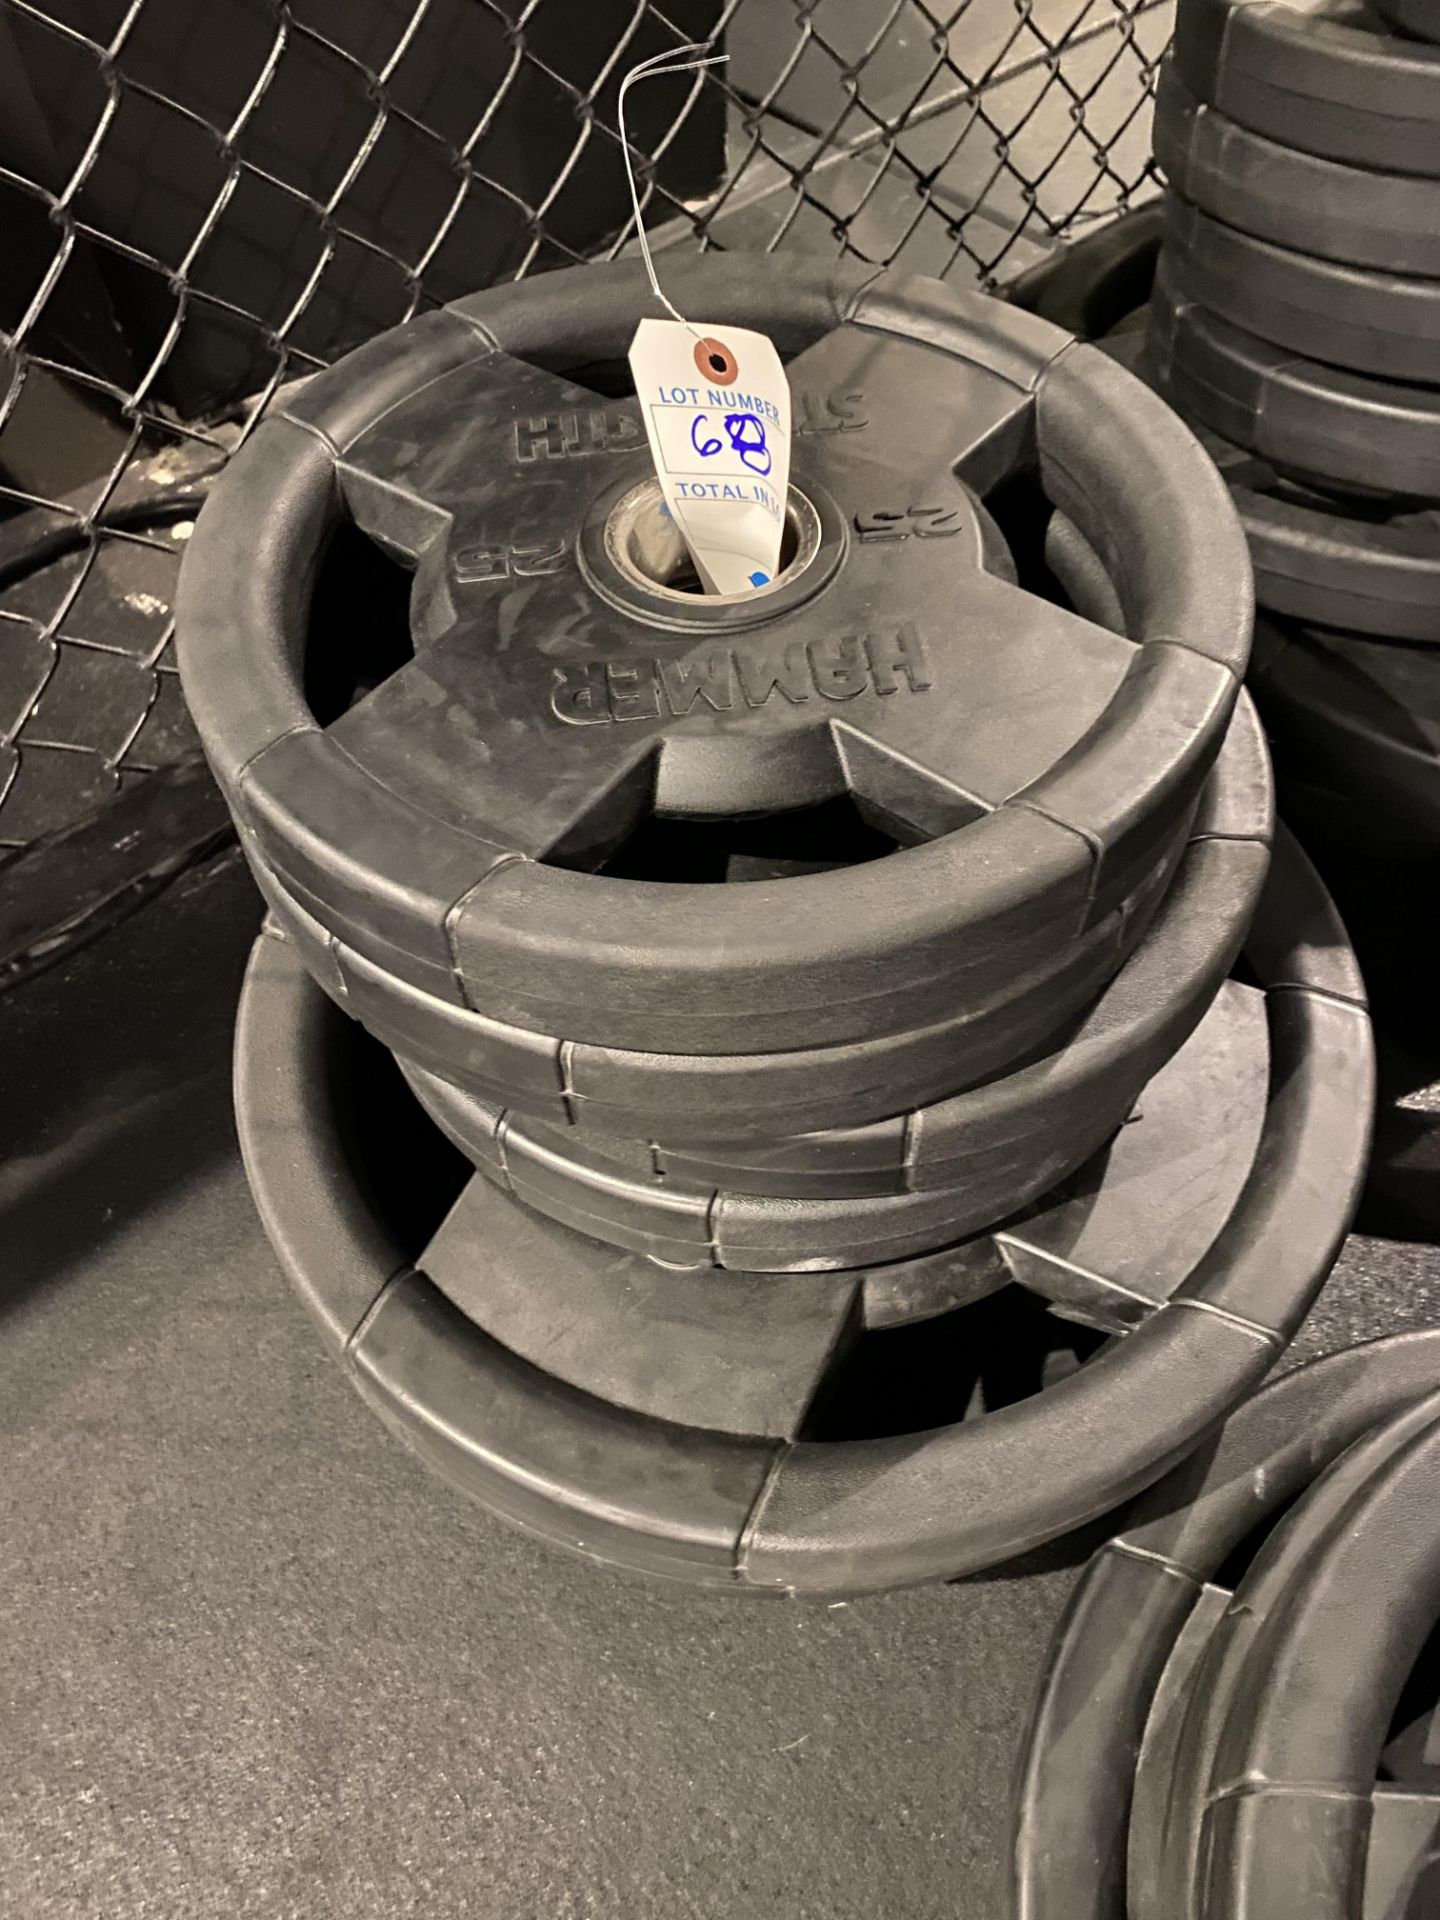 {LOT} Set of Hammer Strength Rubber Coated Weight Plates (280 Lbs. Total) c/o: (4) 45 Lb. Plates, (